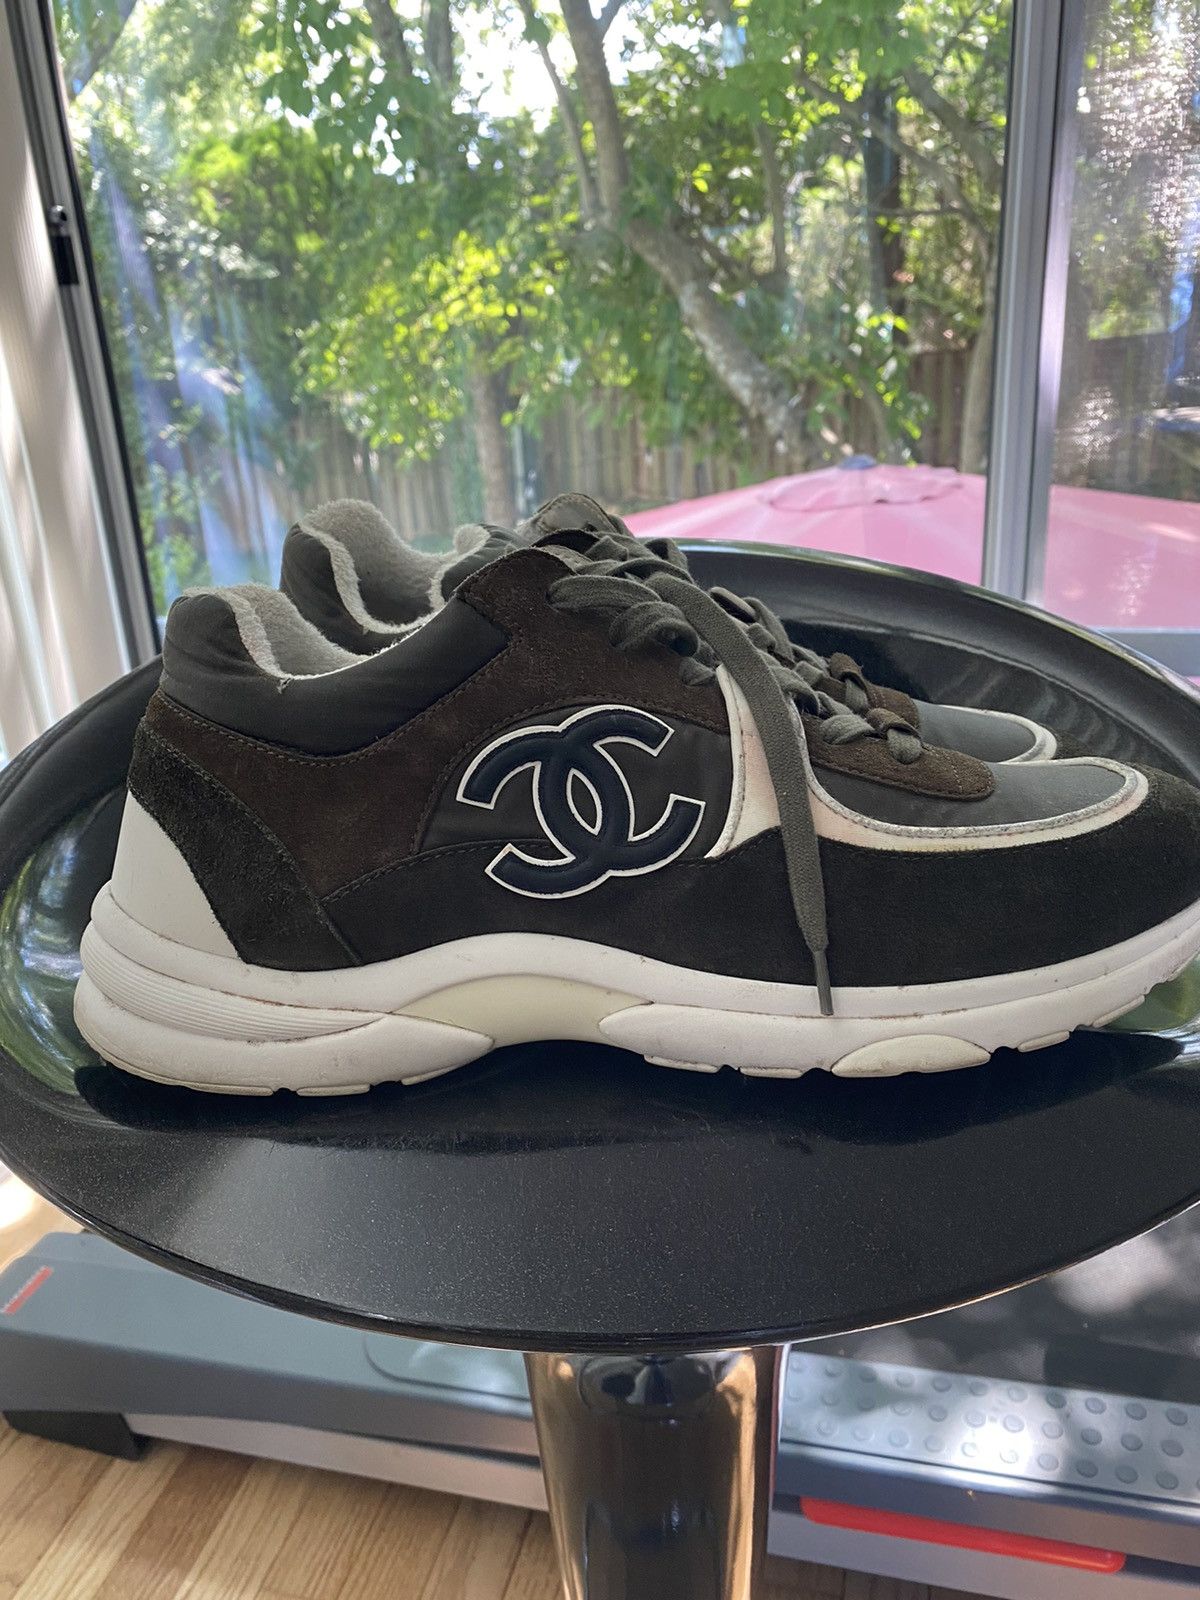 Chanel Chanel Low Top Sneakers, hard to find